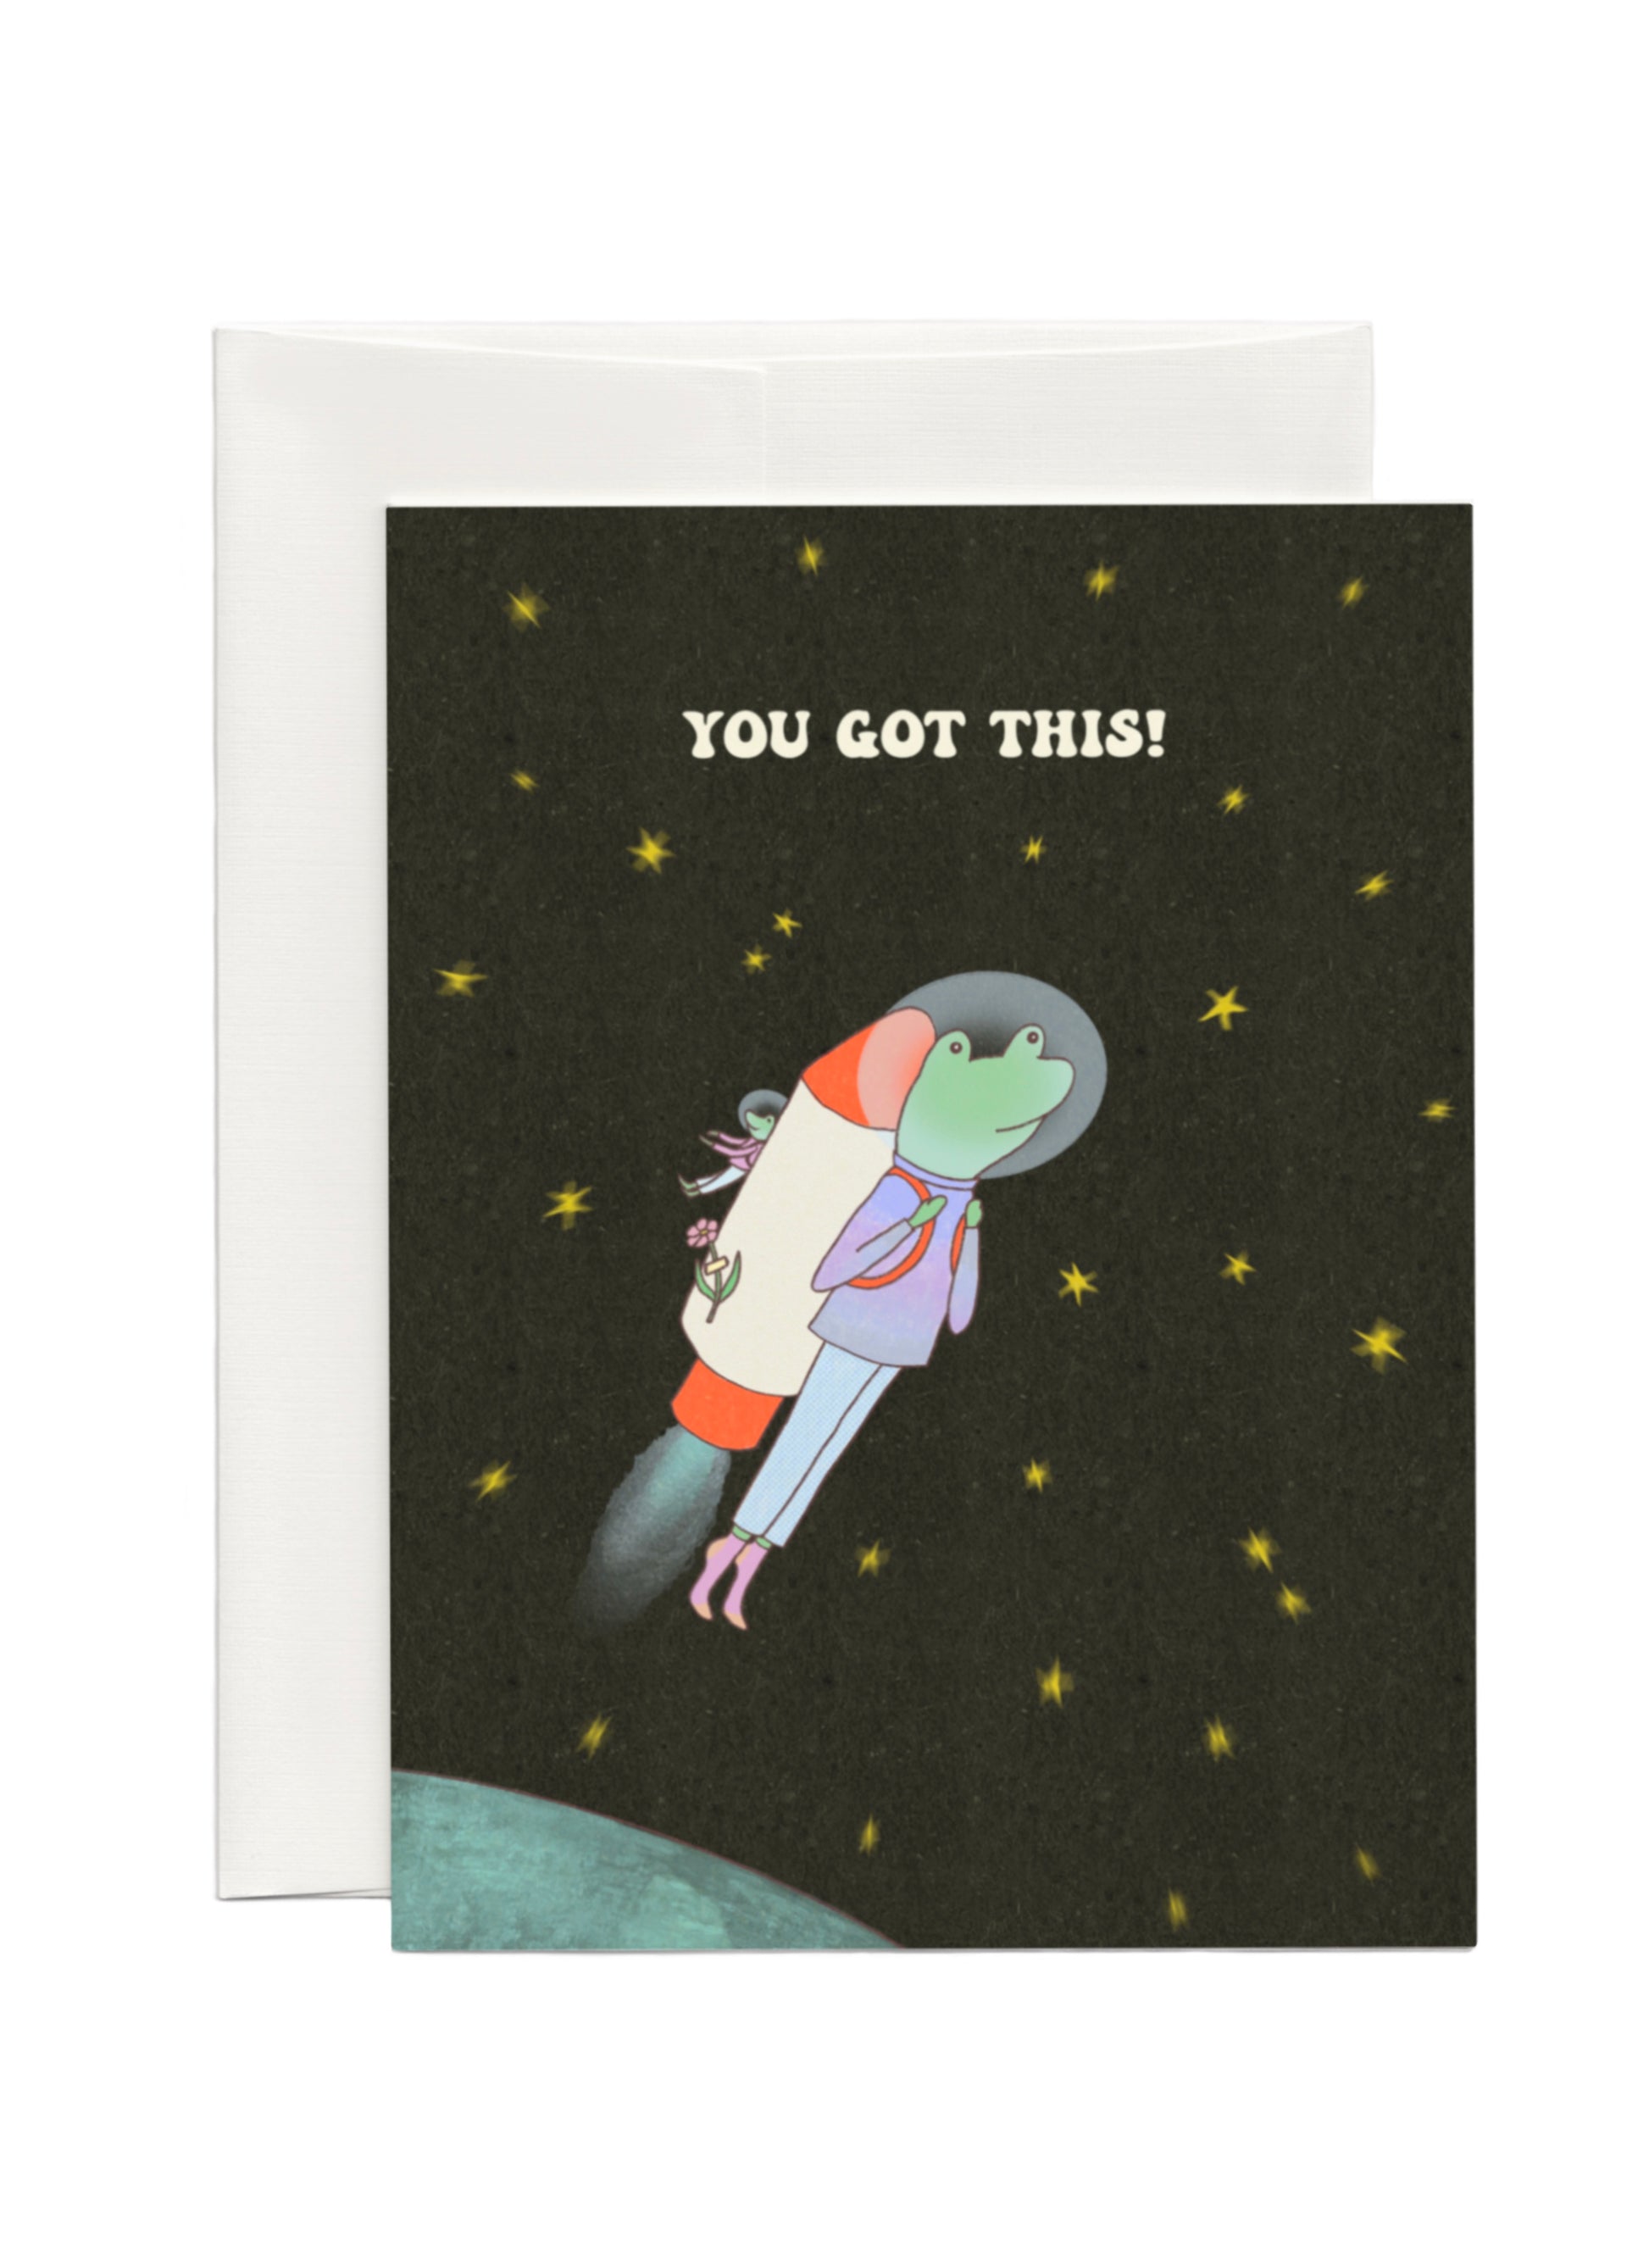 Motivational Good luck Card that says “You Got This” with the illustration of a frog astronaut and his buddy departing into the space